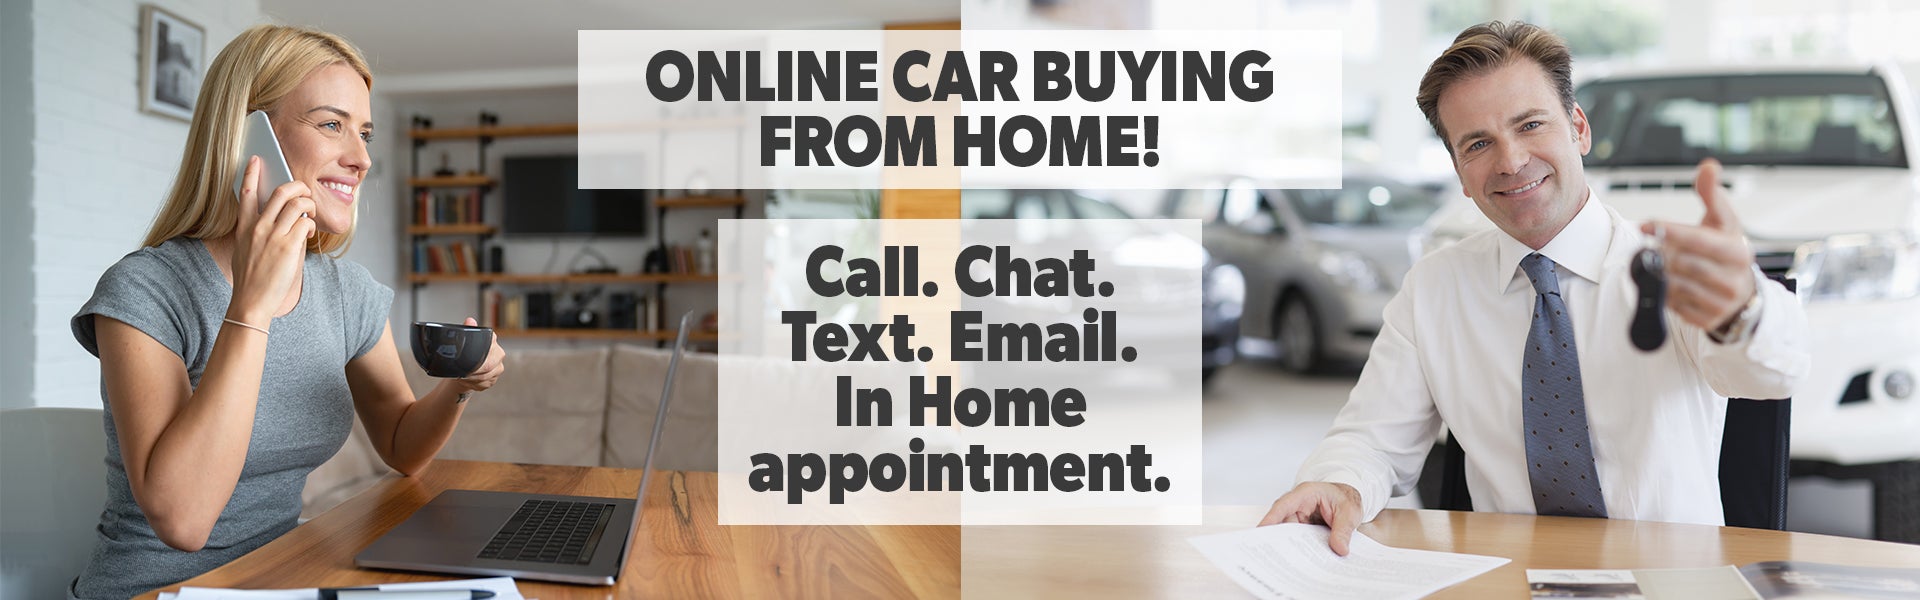 Online Car Buying at Home from Waldorf Chevrolet